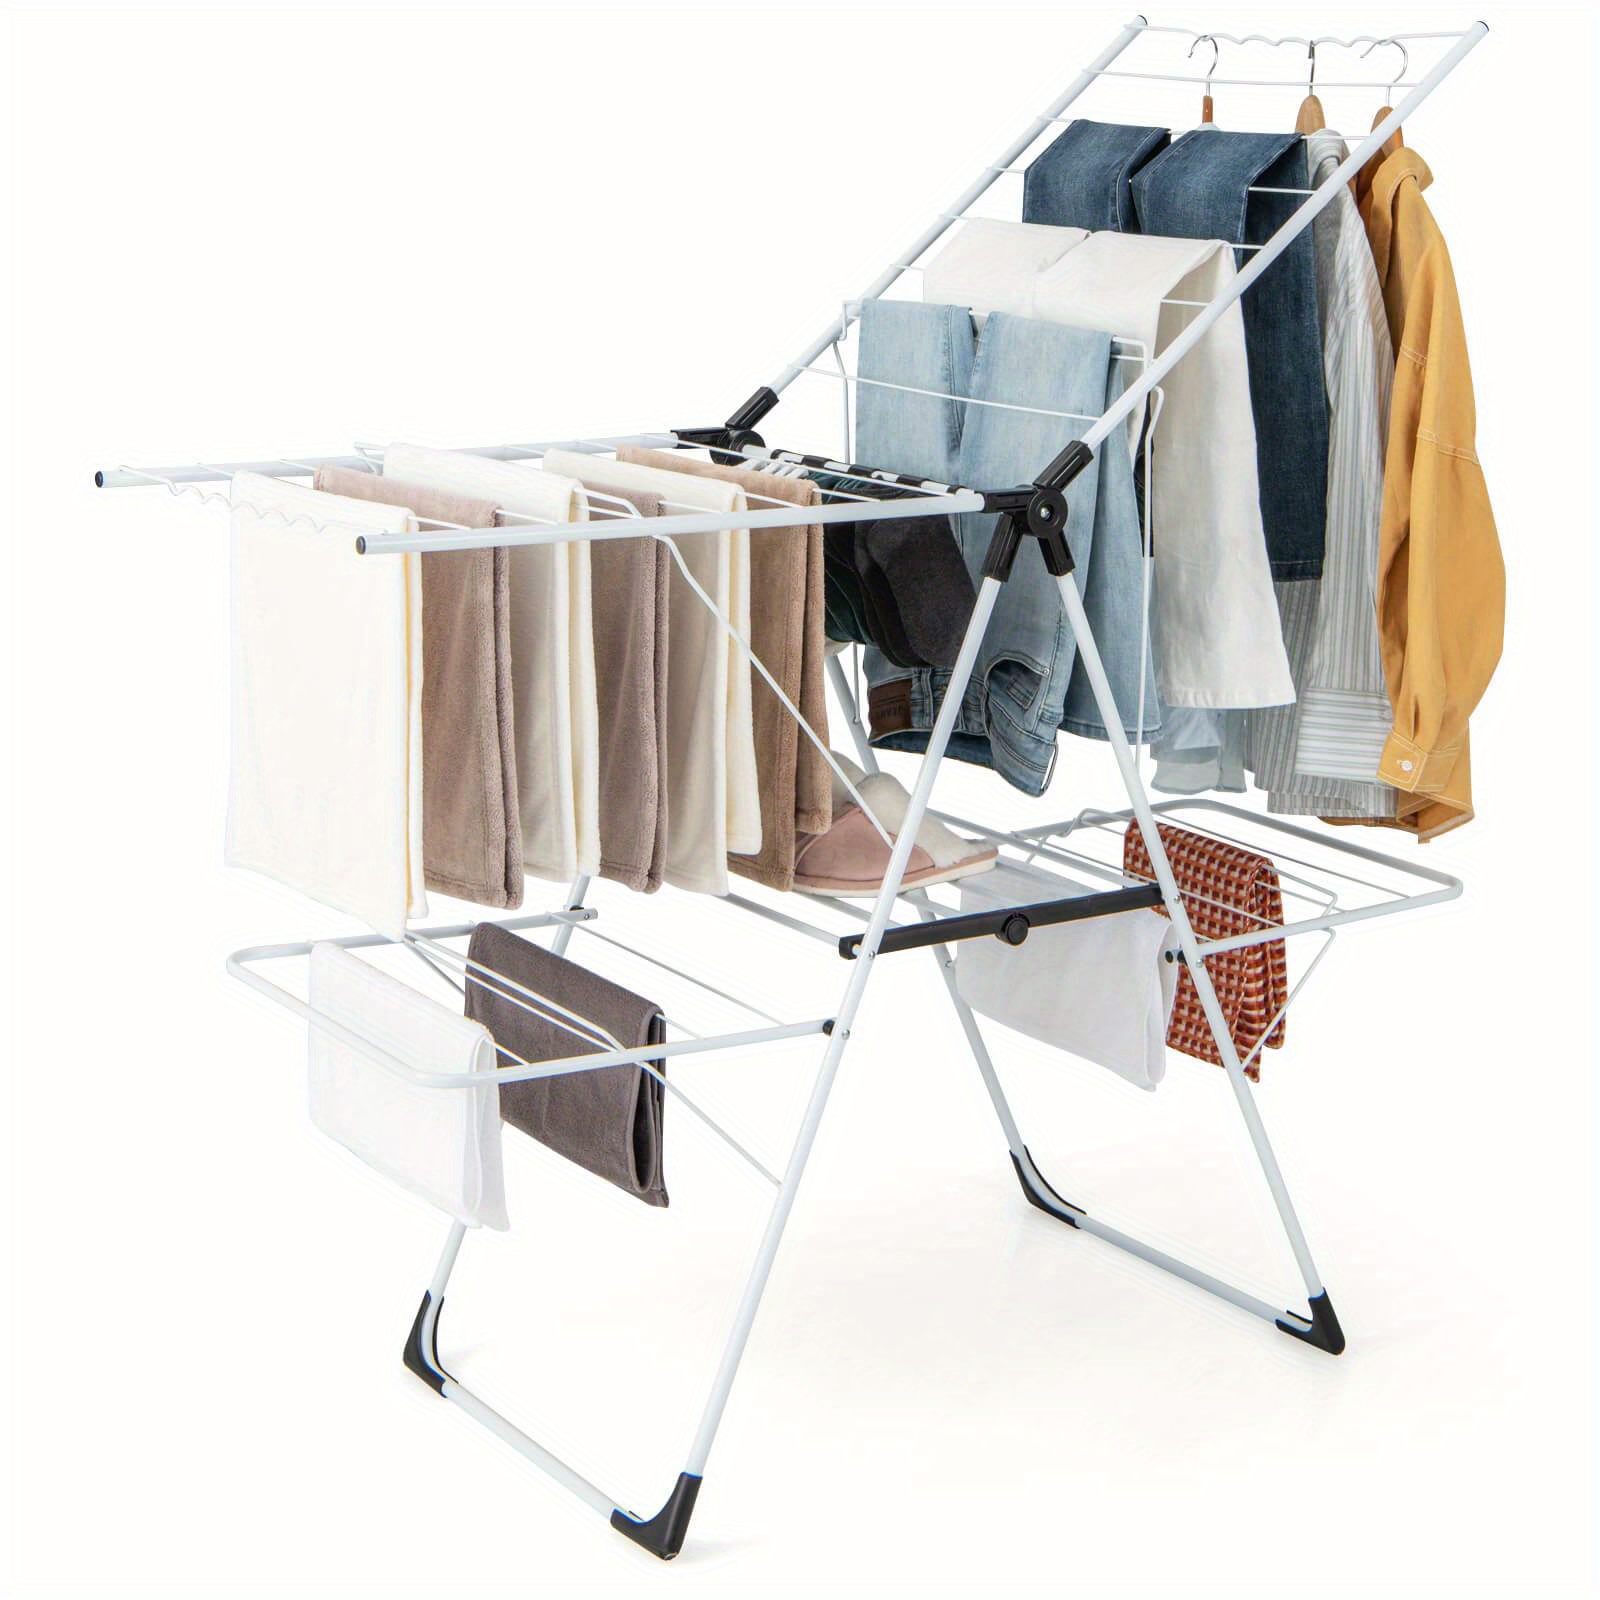 

Folding Clothes Drying Rack 2-tier Metal Laundry Drying Rack Laundry Drying Rack